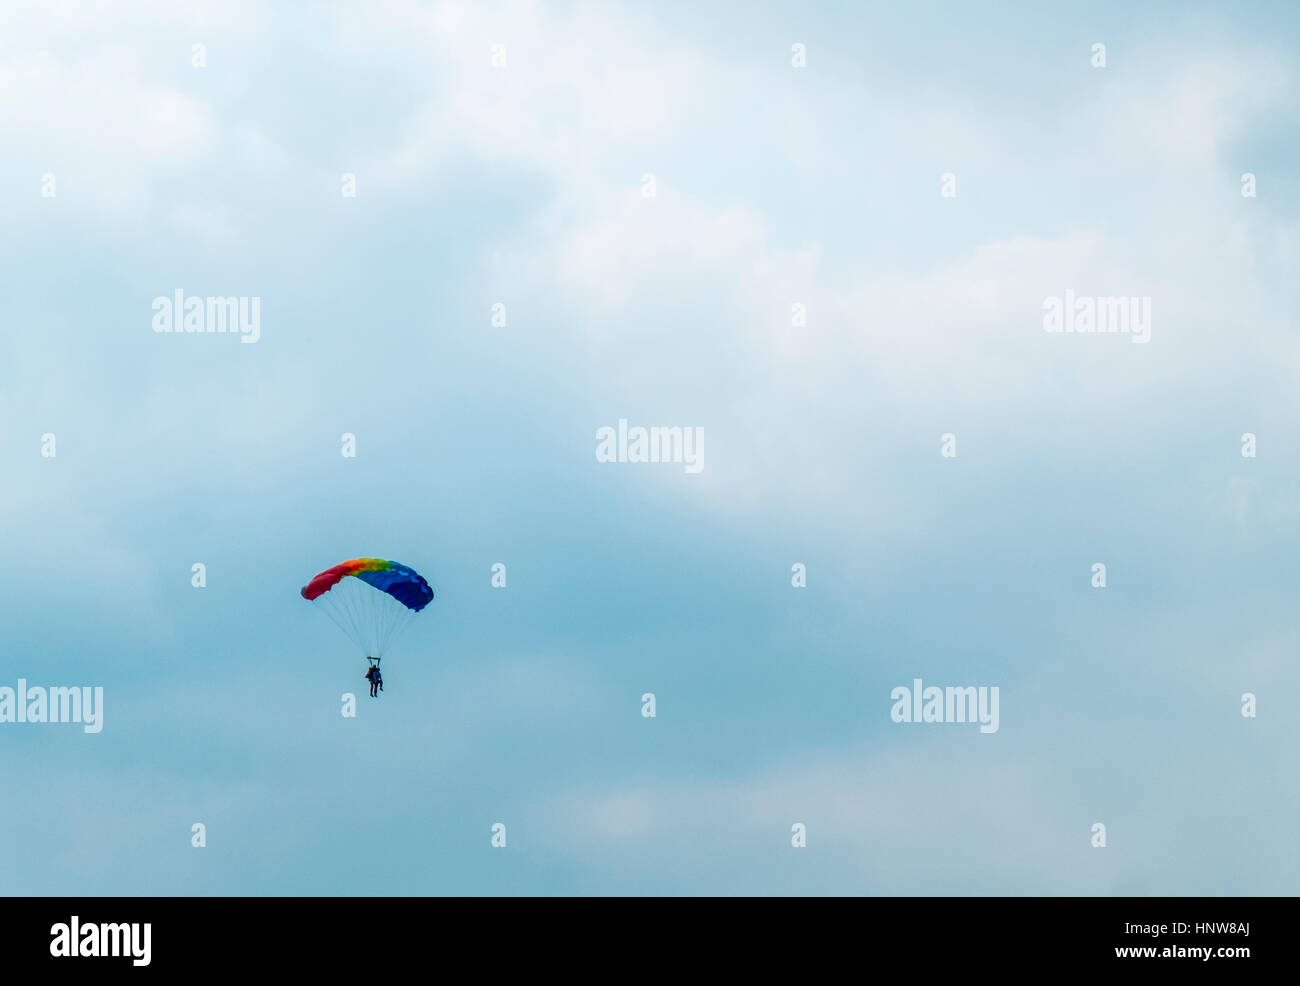 Distant view of man parachuting down against cloudy sky Stock Photo